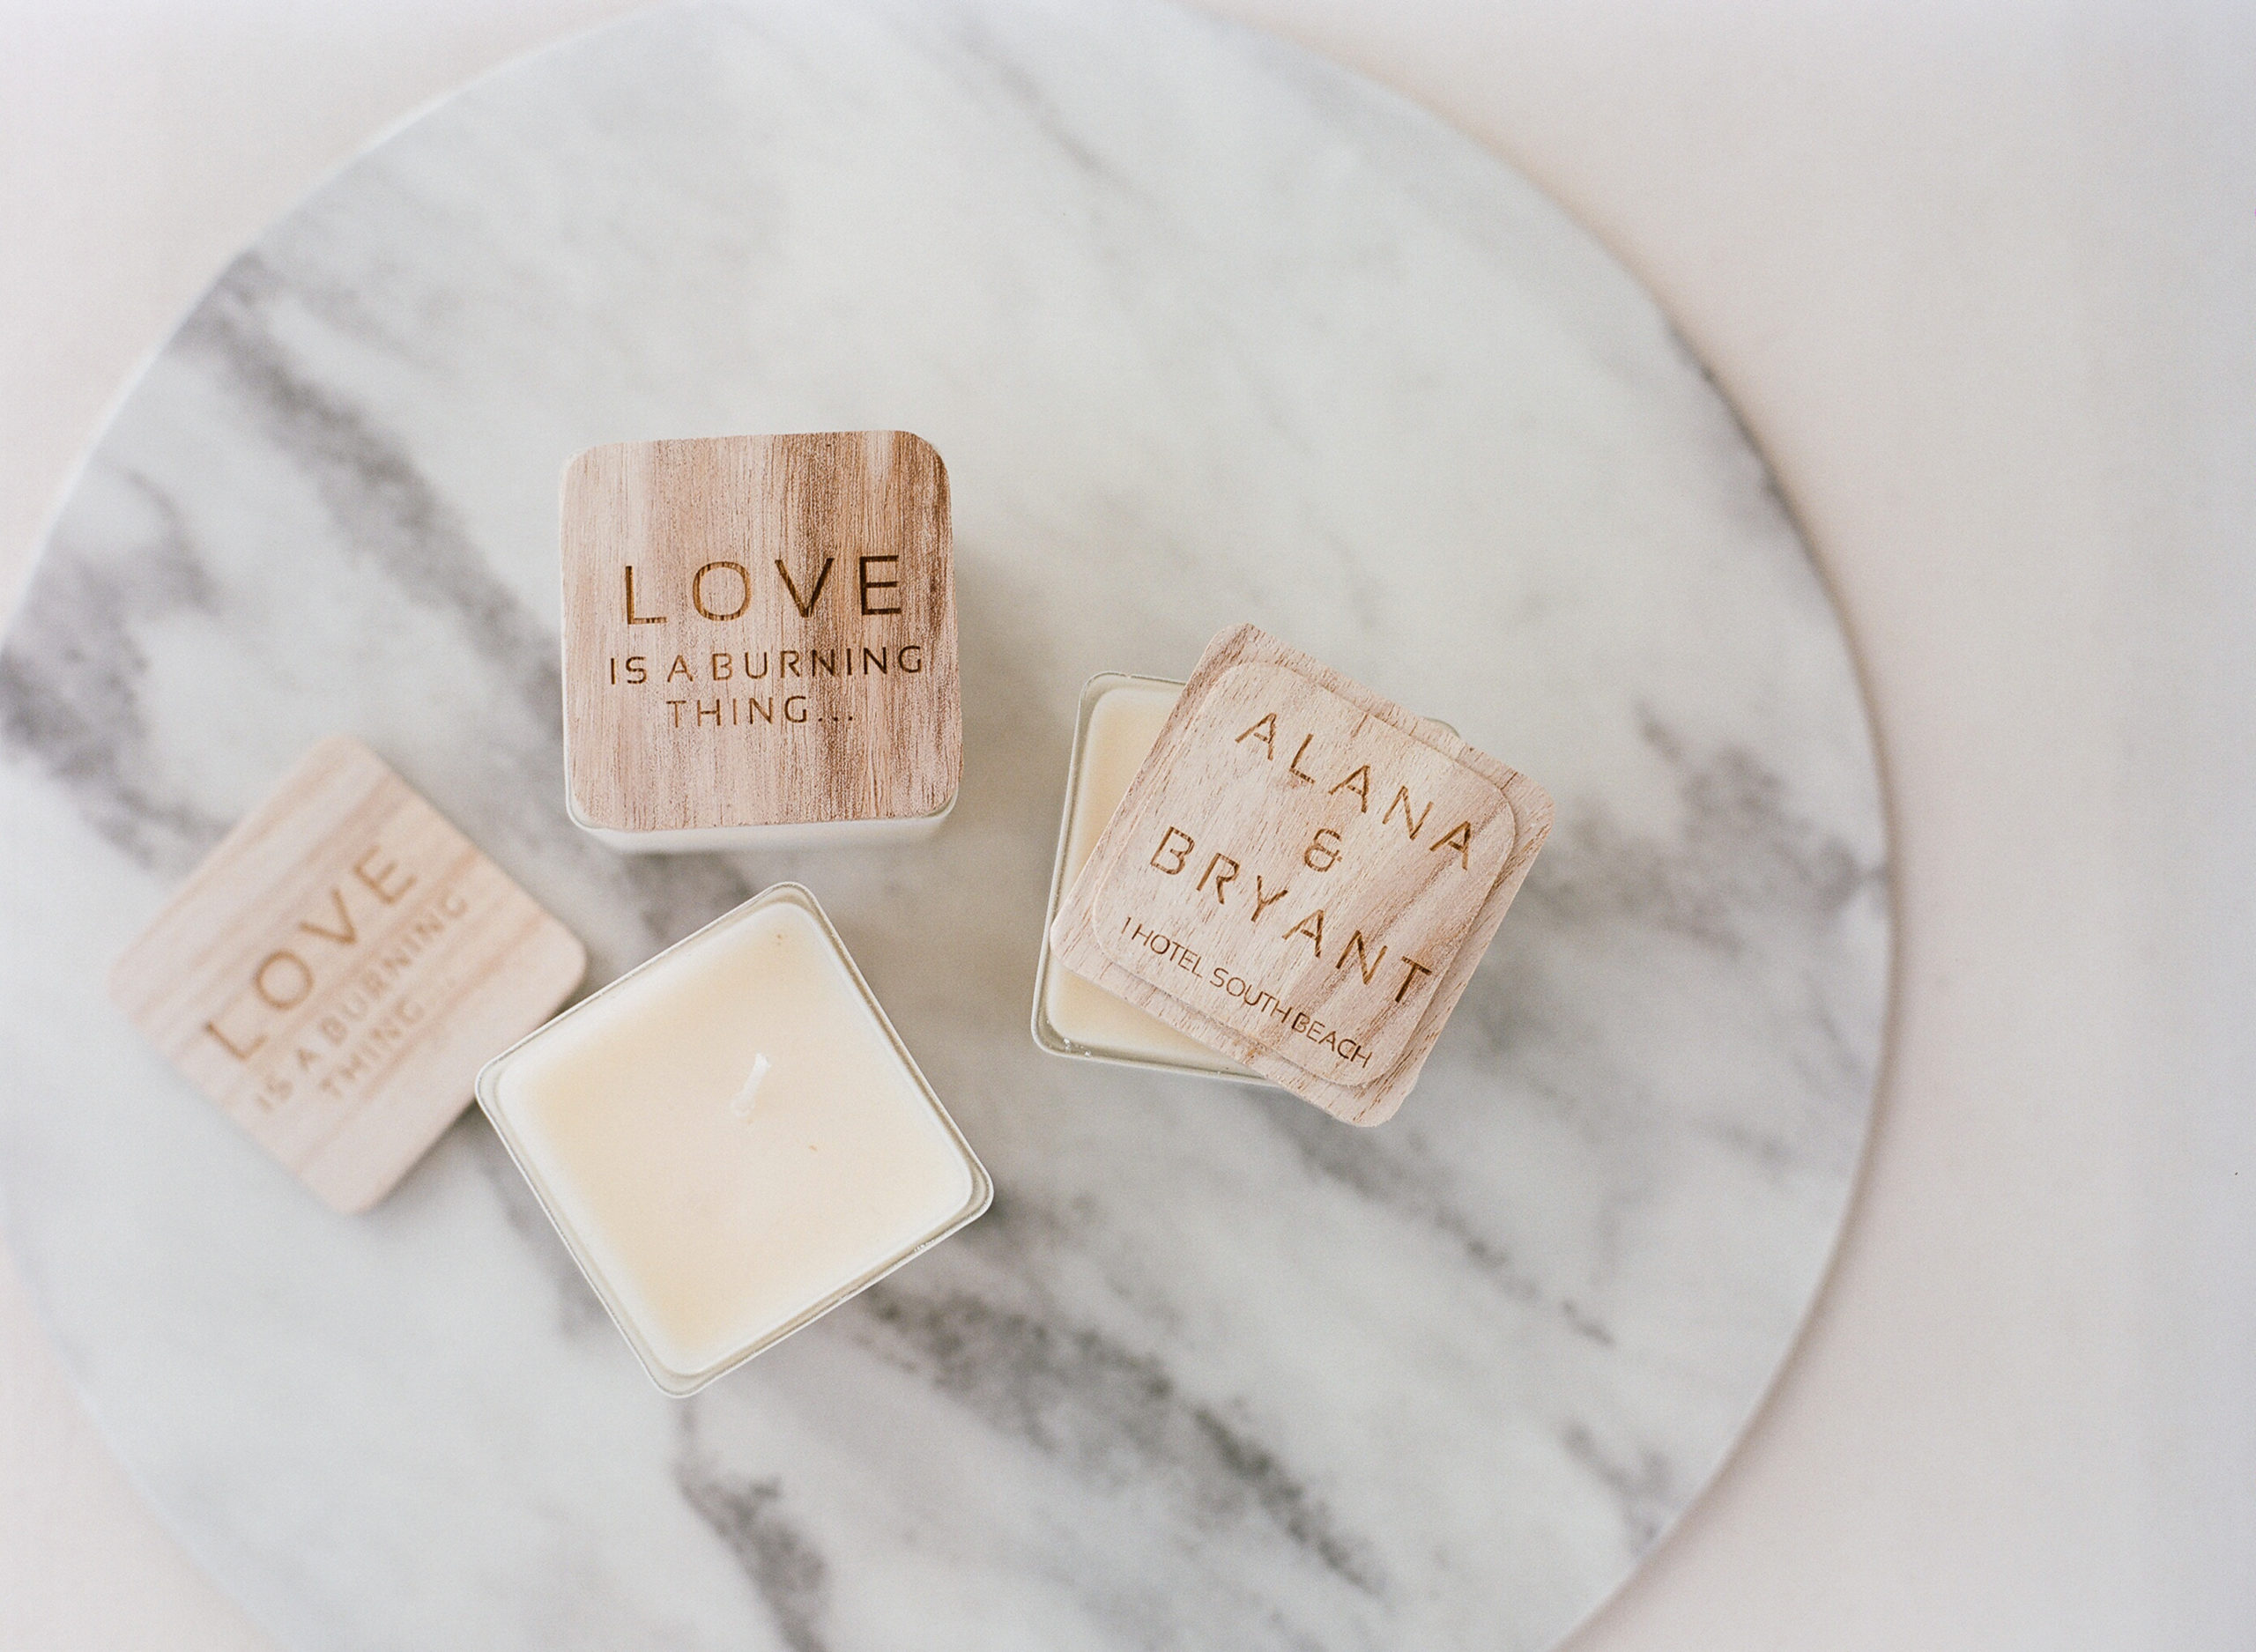 The personalized candle wedding favors from Taja Collection were engraved with the Ring of Fire lyrics